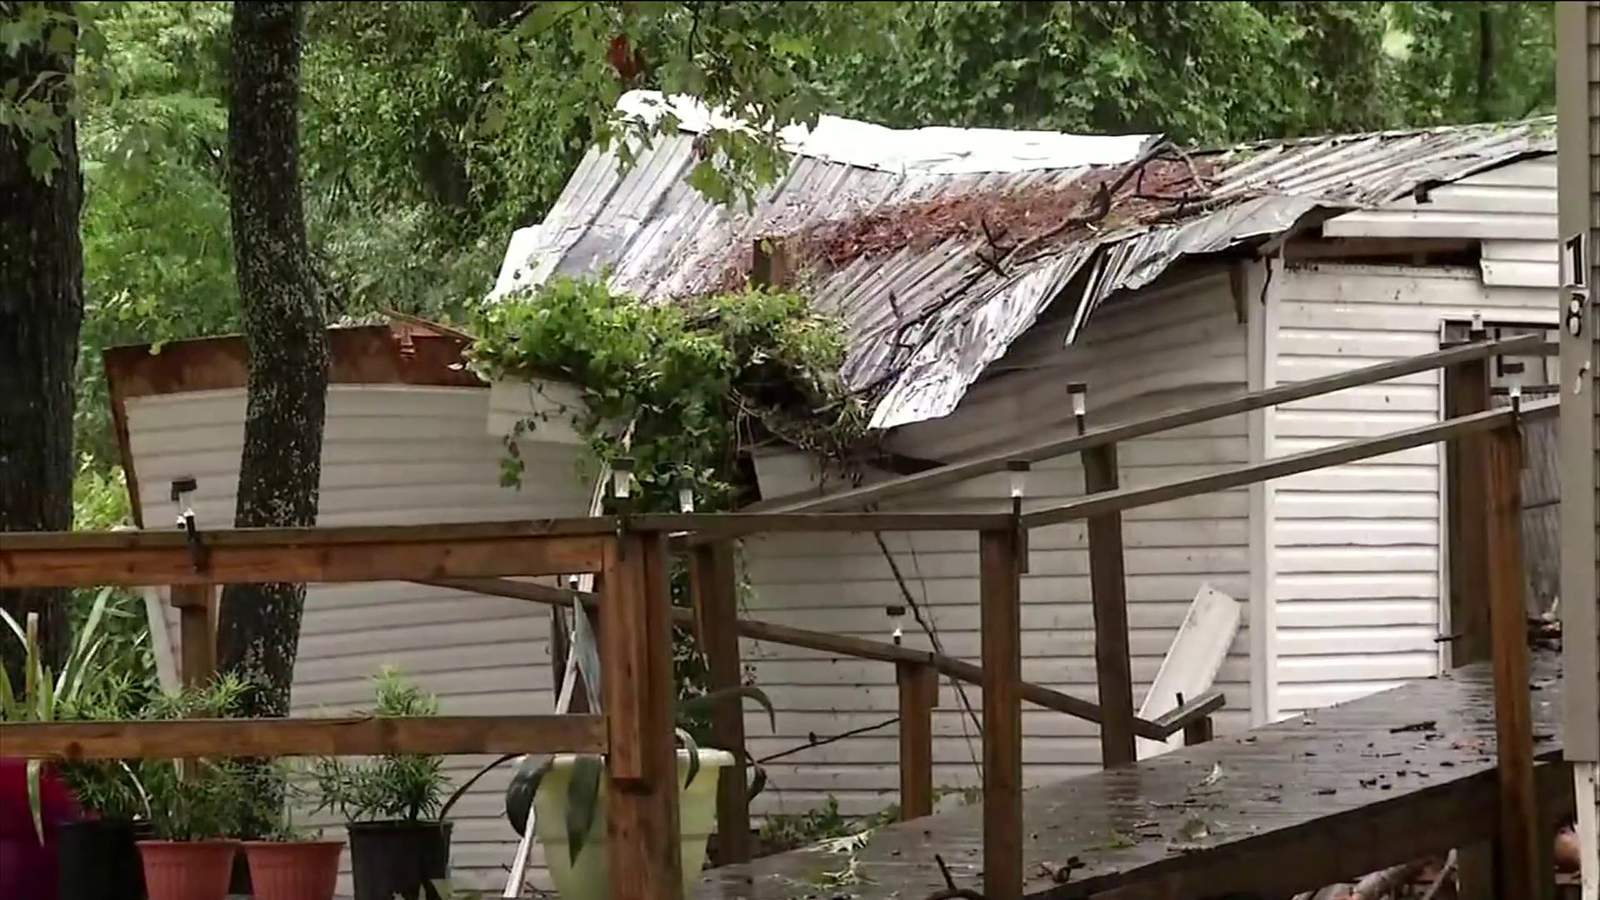 Lake City mother and daughter survive intense storm